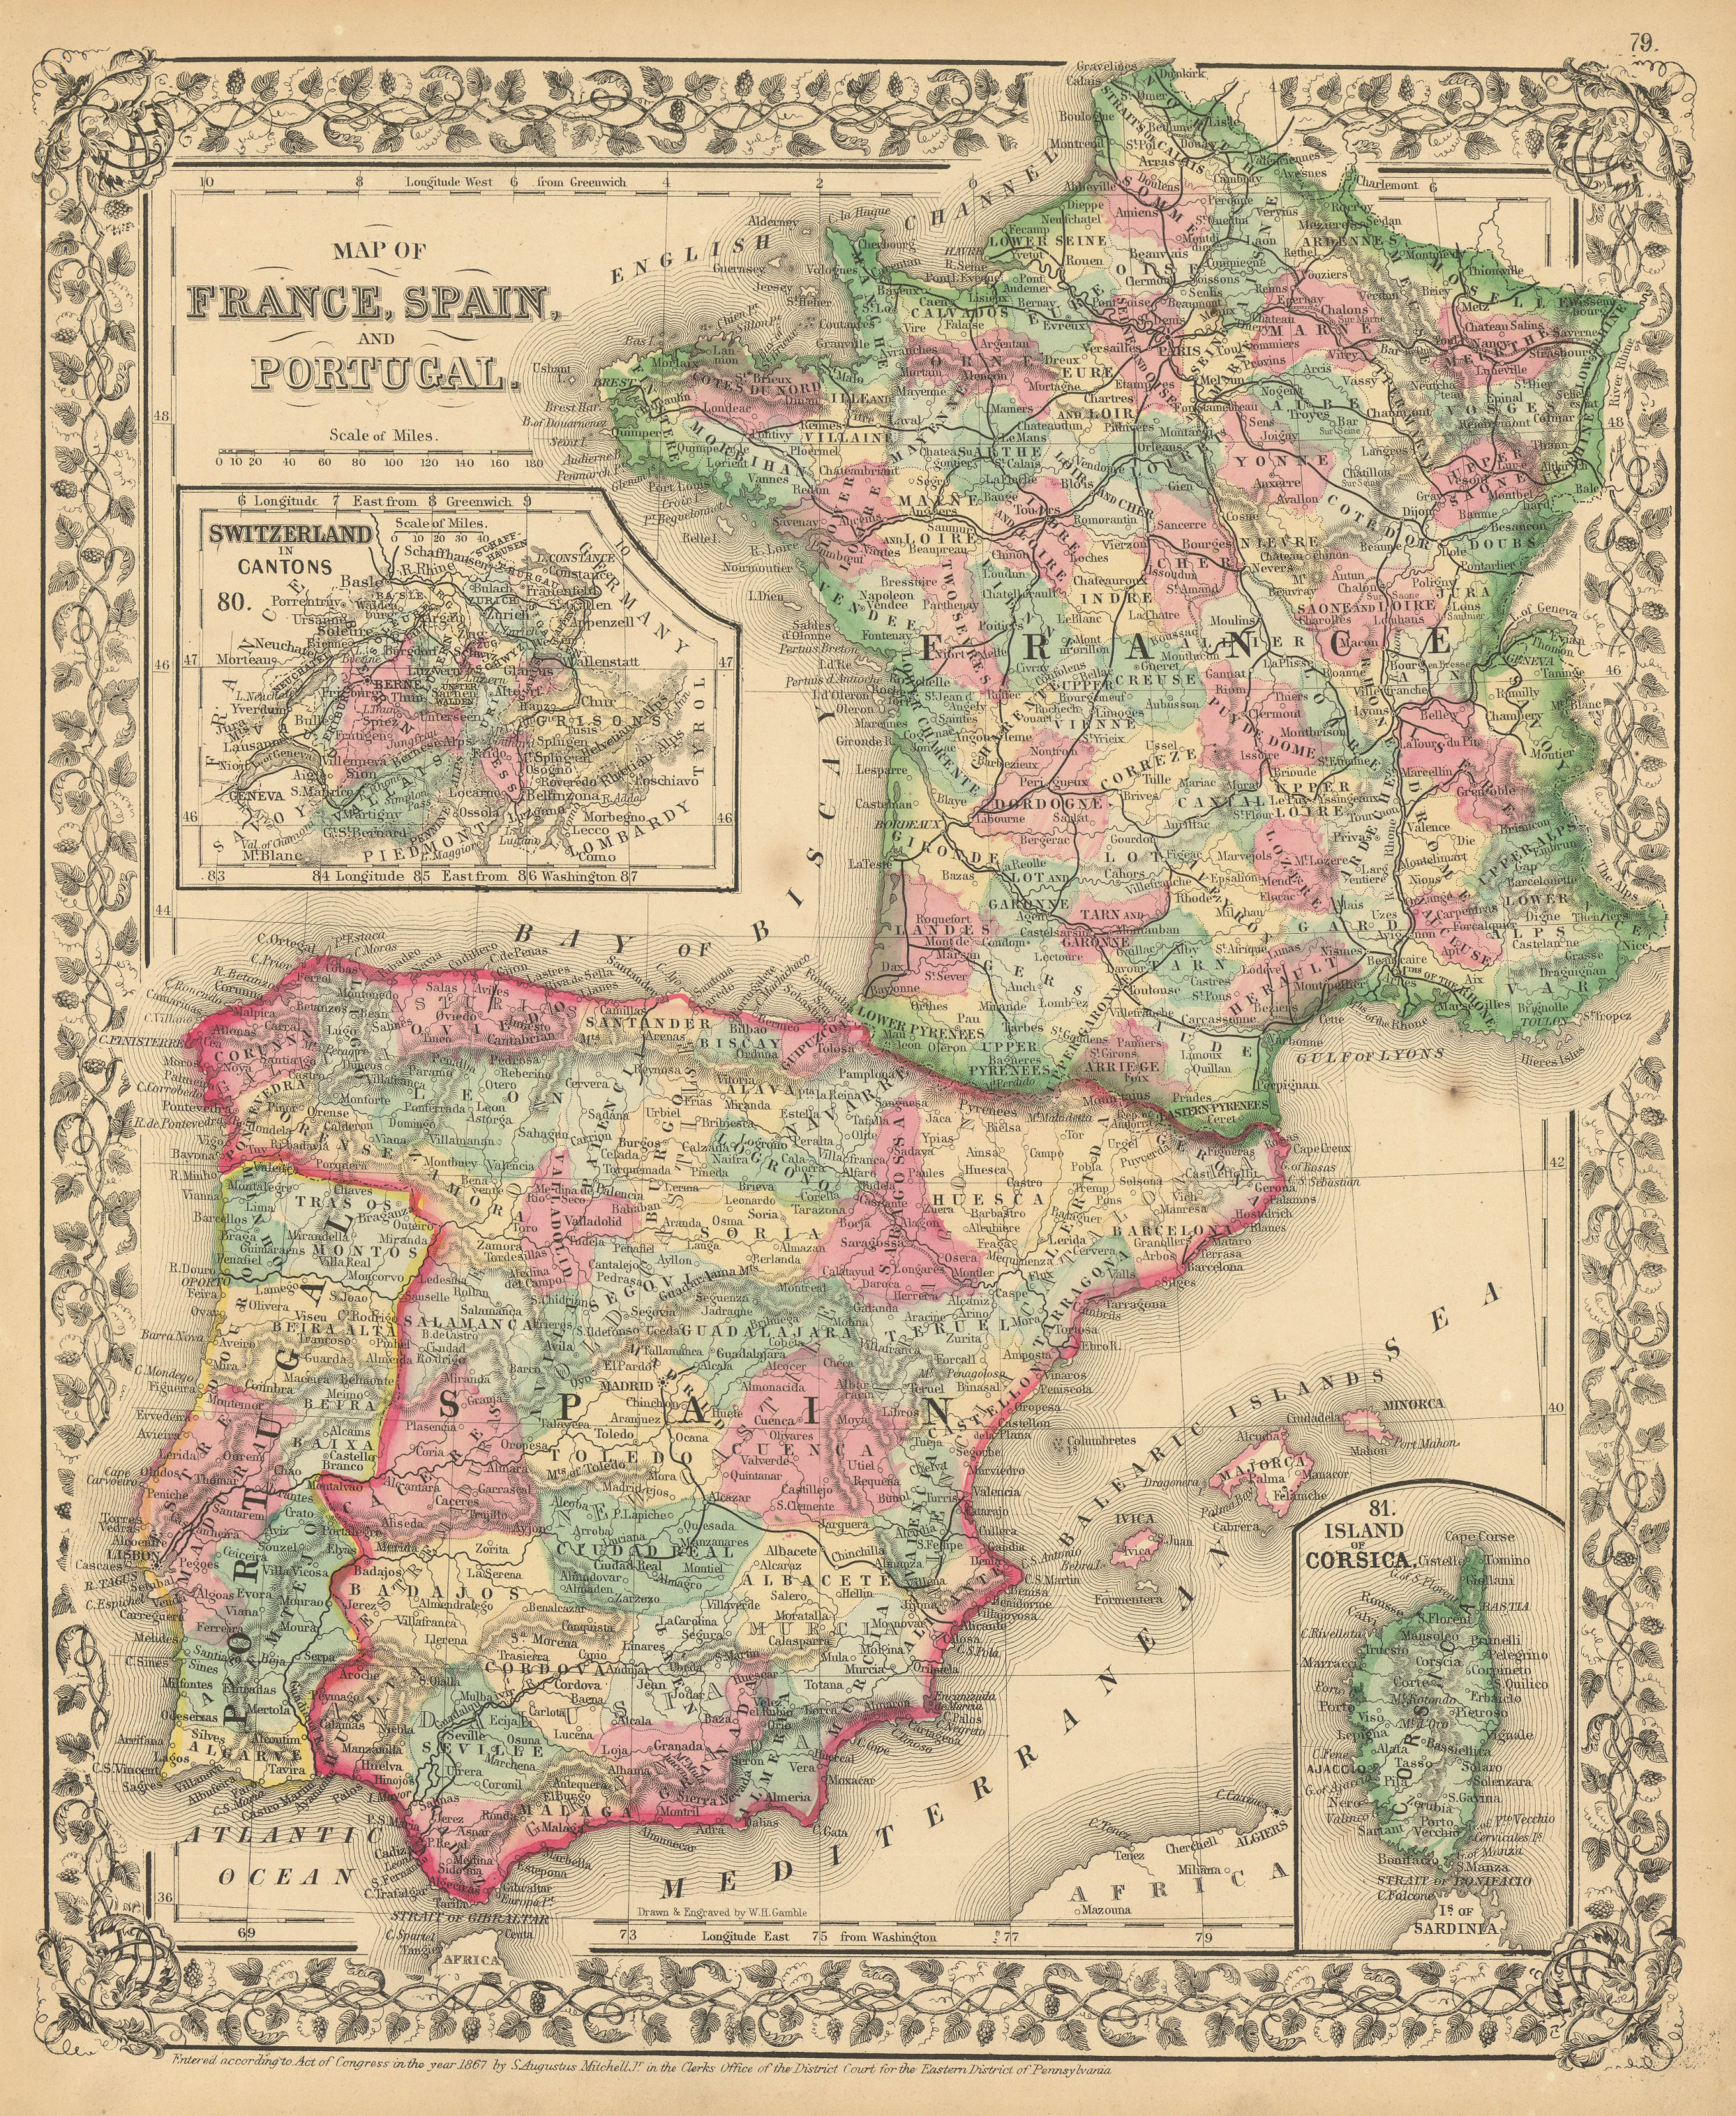 Map of France, Spain, and Portugal. Switzerland in Cantons. MITCHELL 1869